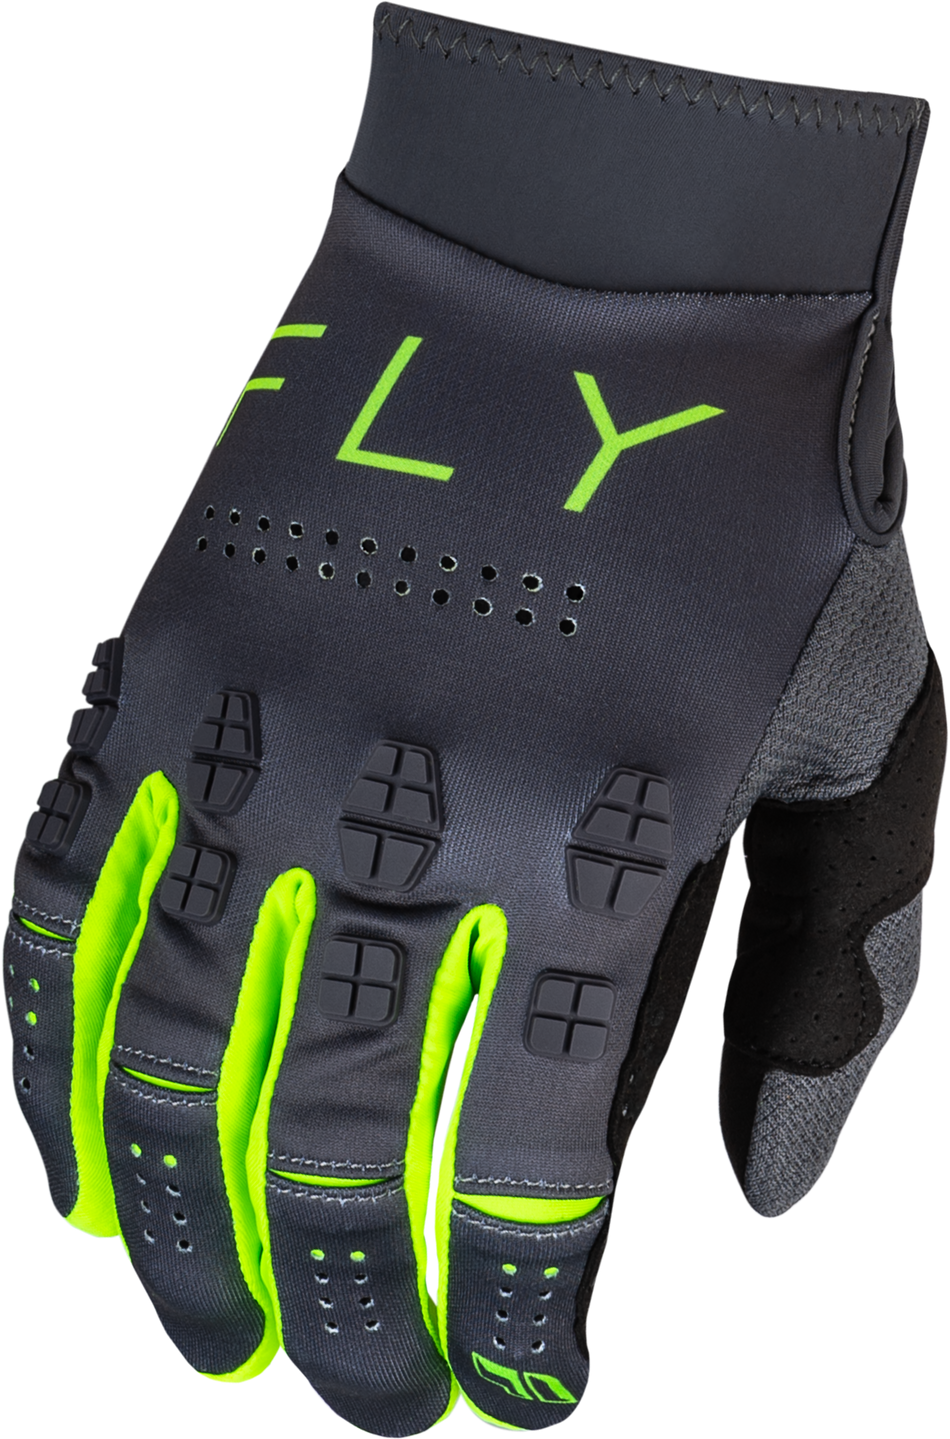 FLY RACING Evolution Dst Gloves Charcoal/Neon Green Md 377-111M